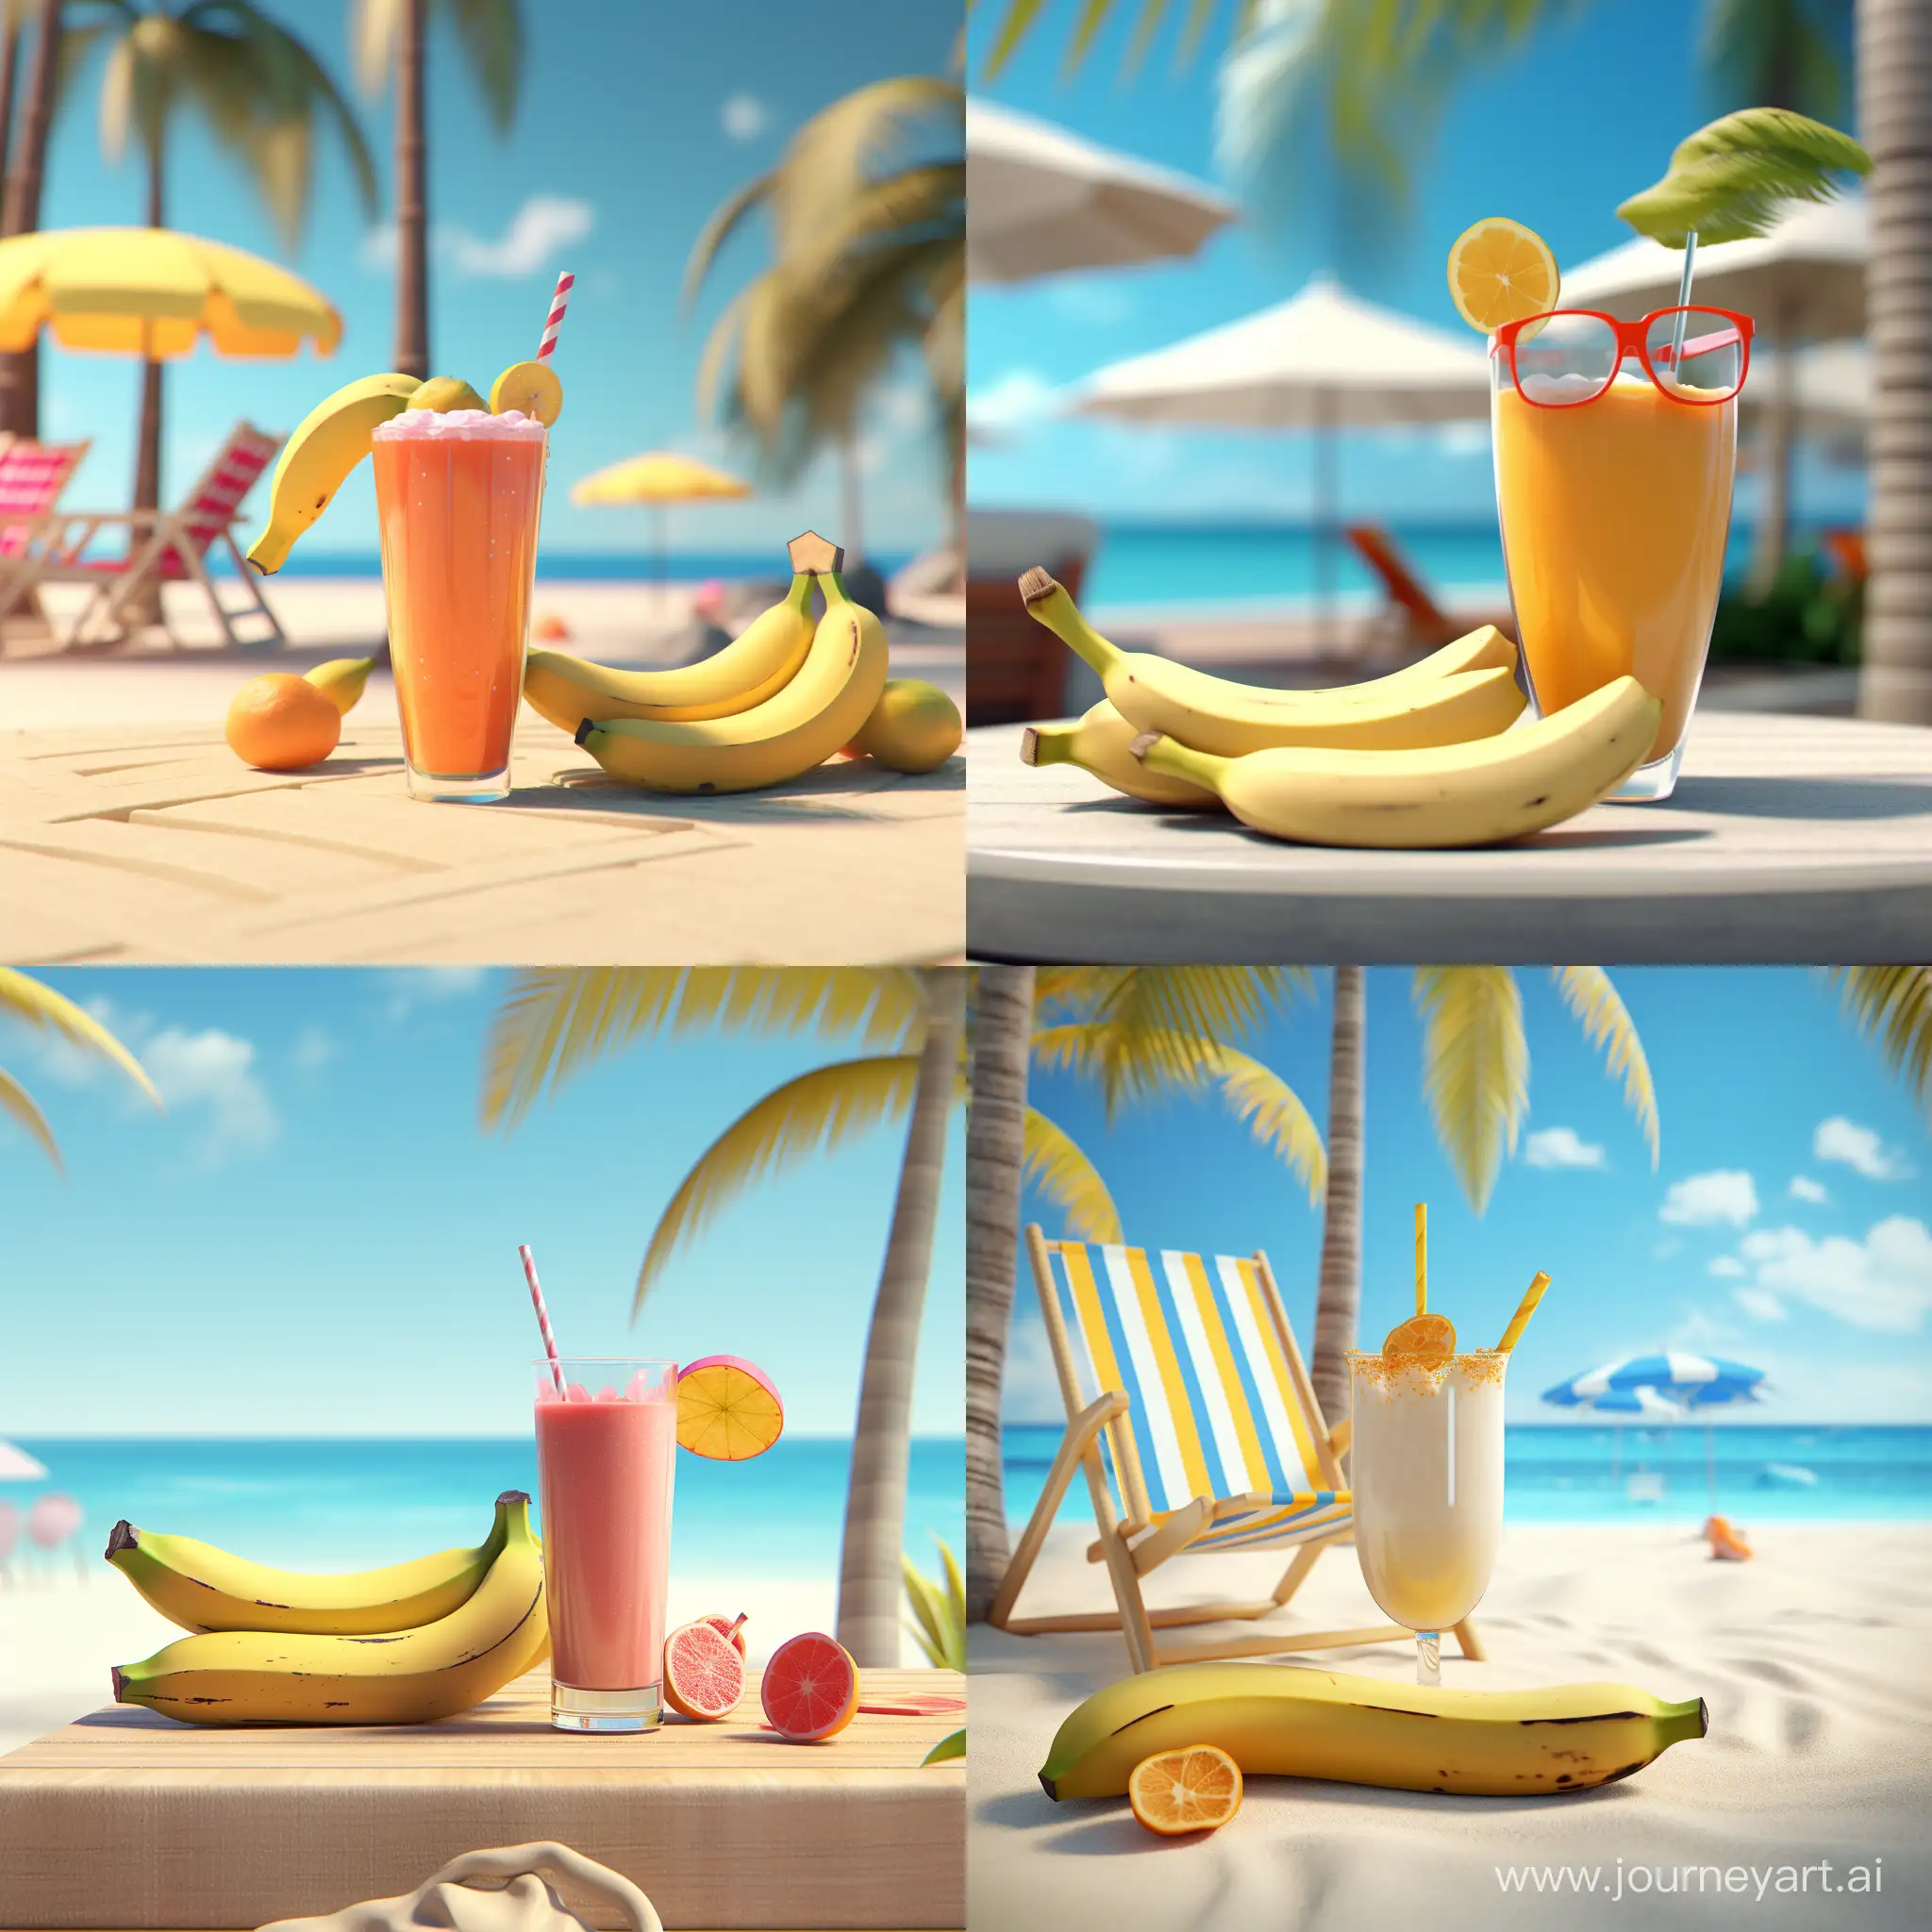 A cool banana relaxes on the beach and drinks a smoothie. 3D animation 